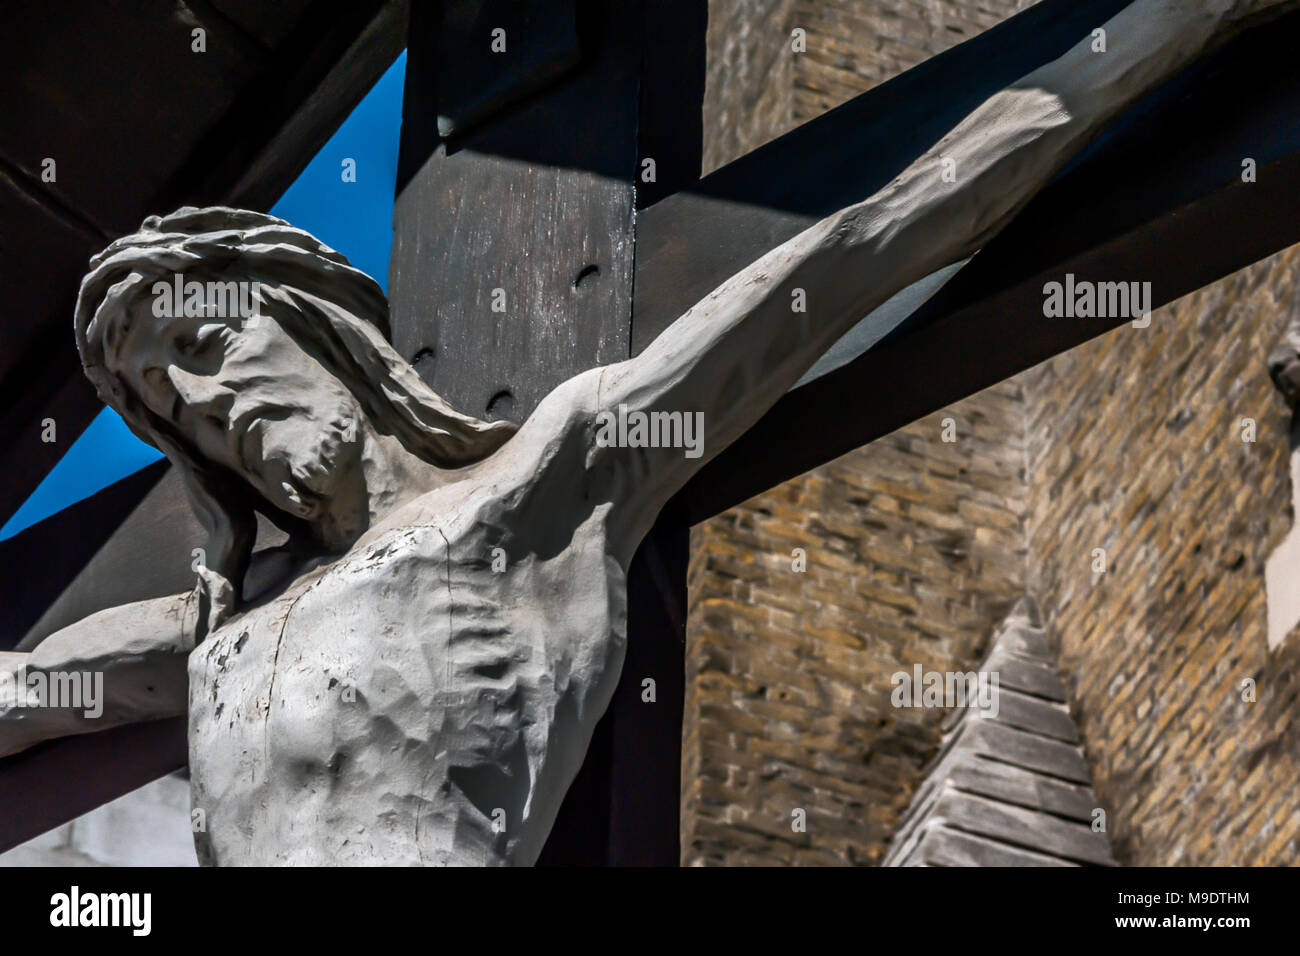 Jesus Christ on cross sculpture at St George's Cathedral the Roman Catholic church designed by Augustus Pugin in Southwark, London Stock Photo